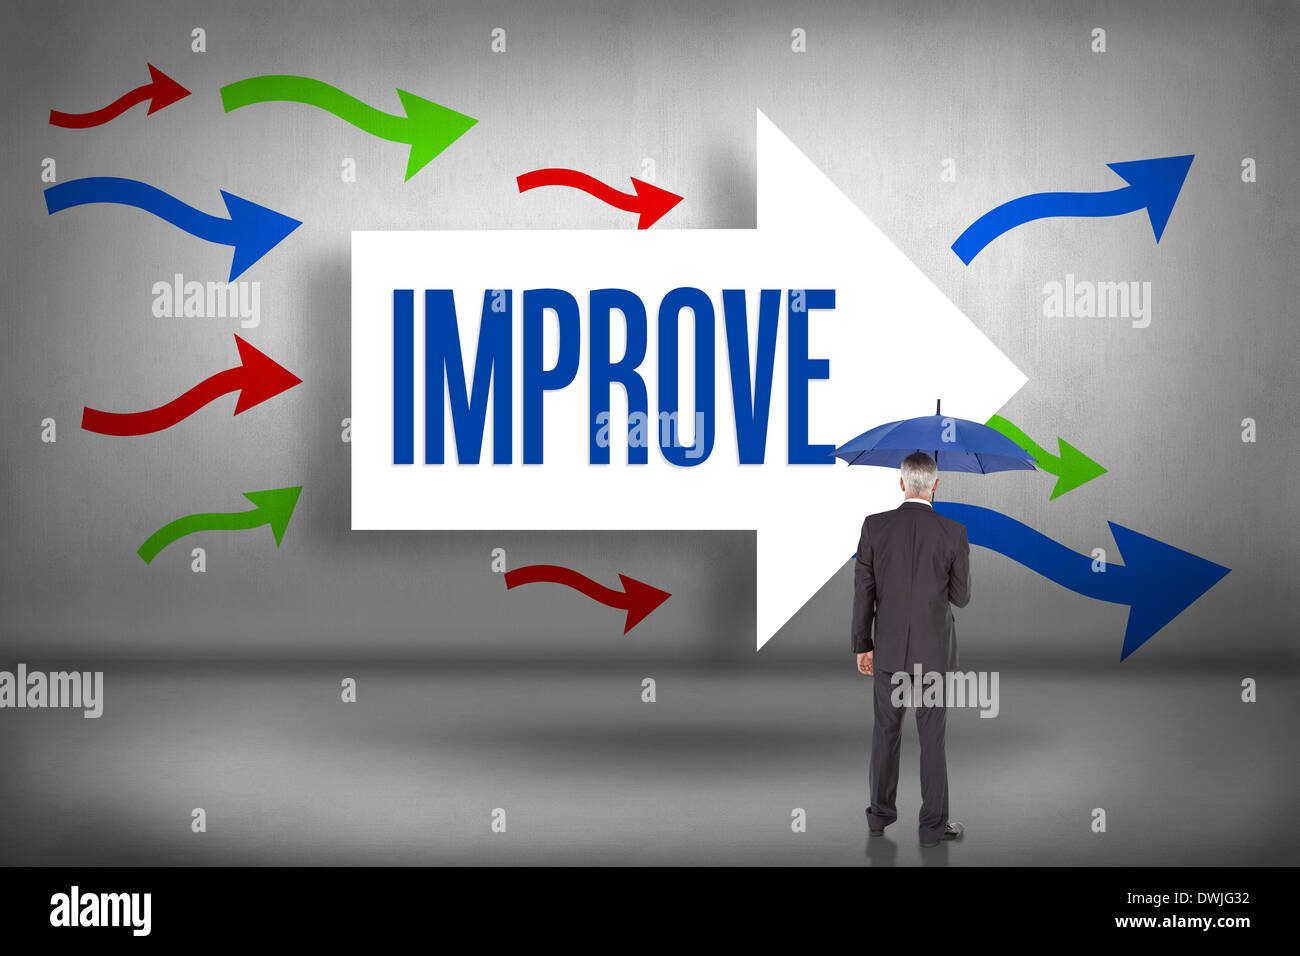 Improve against arrows pointing Stock Photo